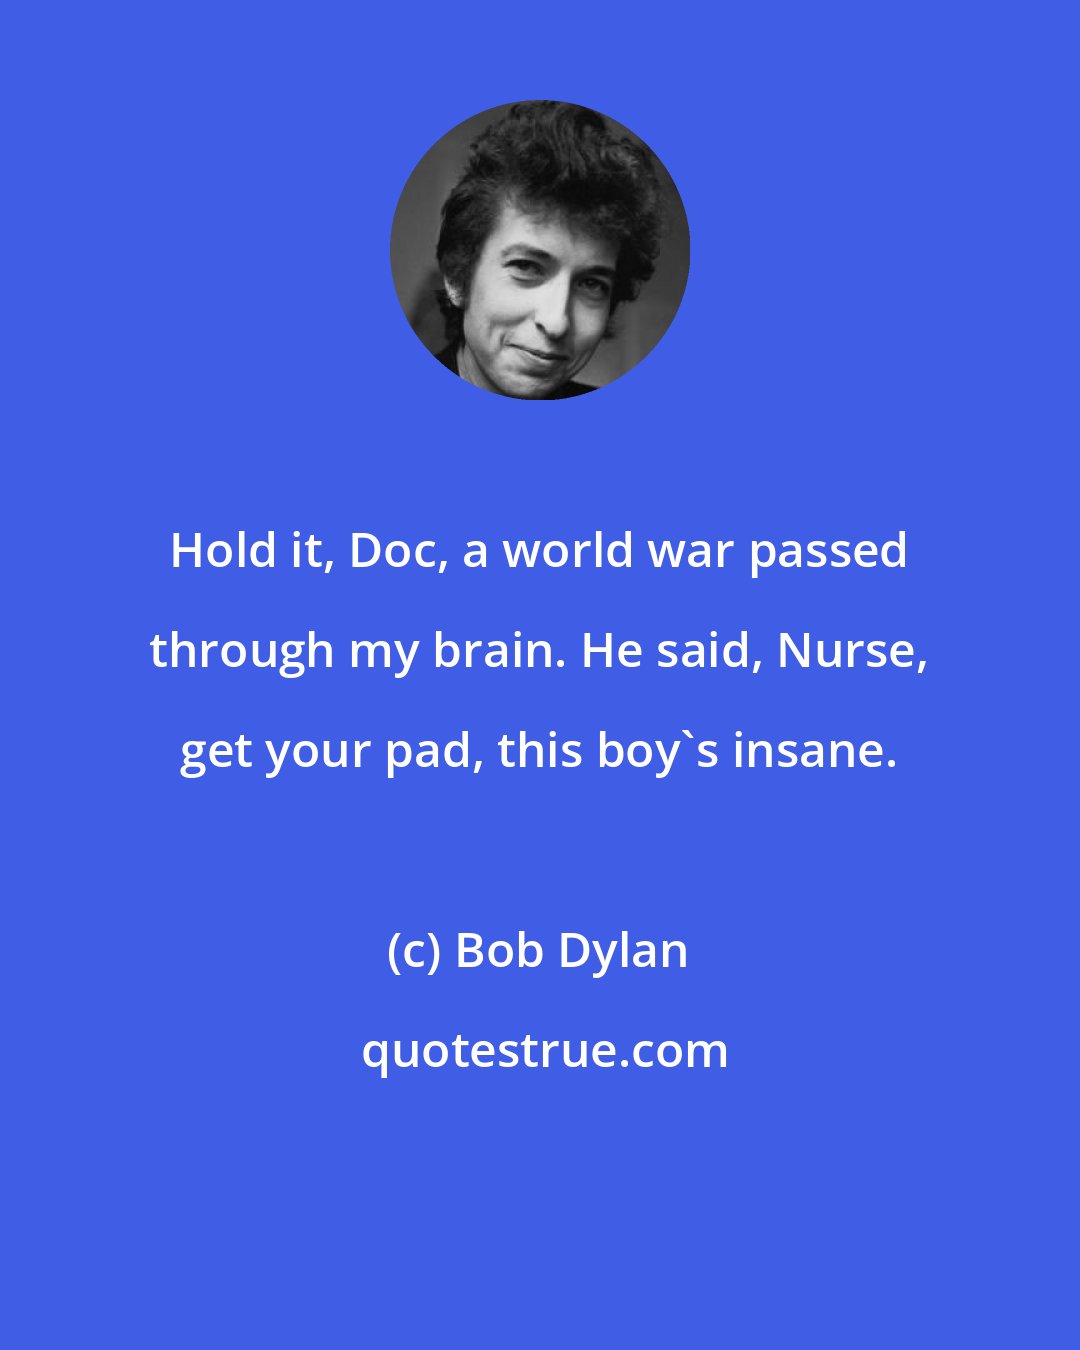 Bob Dylan: Hold it, Doc, a world war passed through my brain. He said, Nurse, get your pad, this boy's insane.